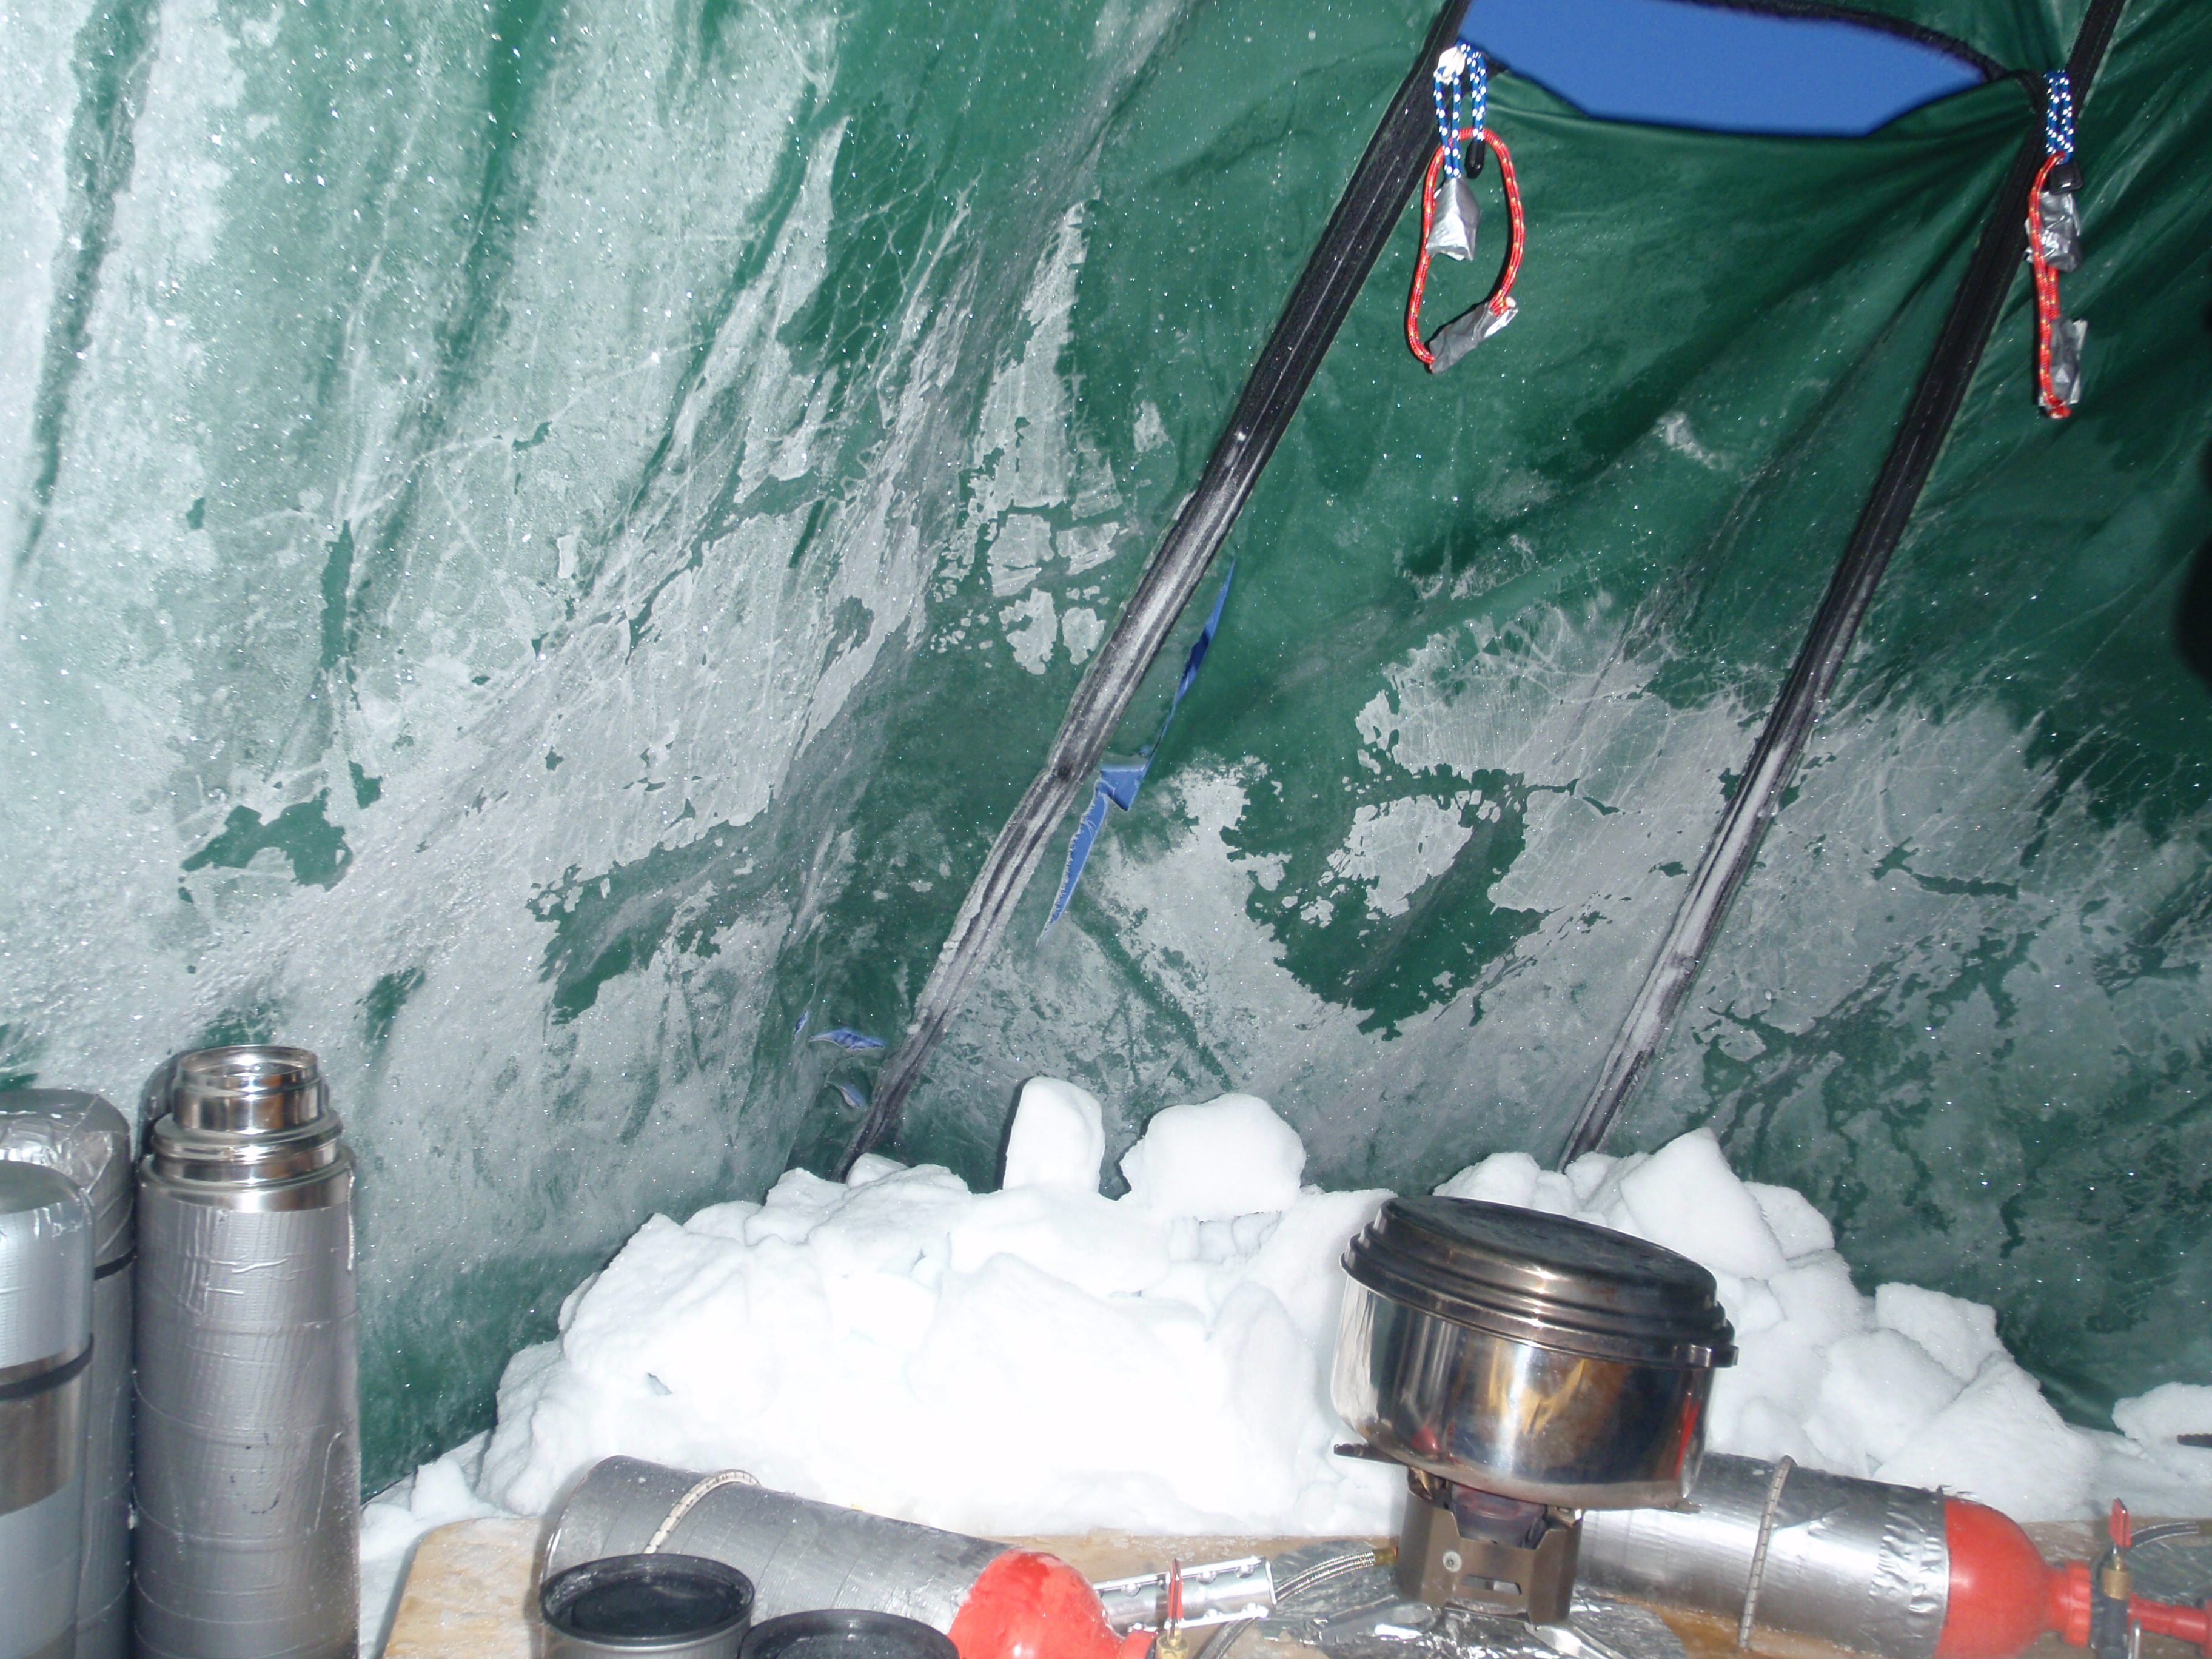 Damage done to our tent (Arctic 2009) by a Polar Bear